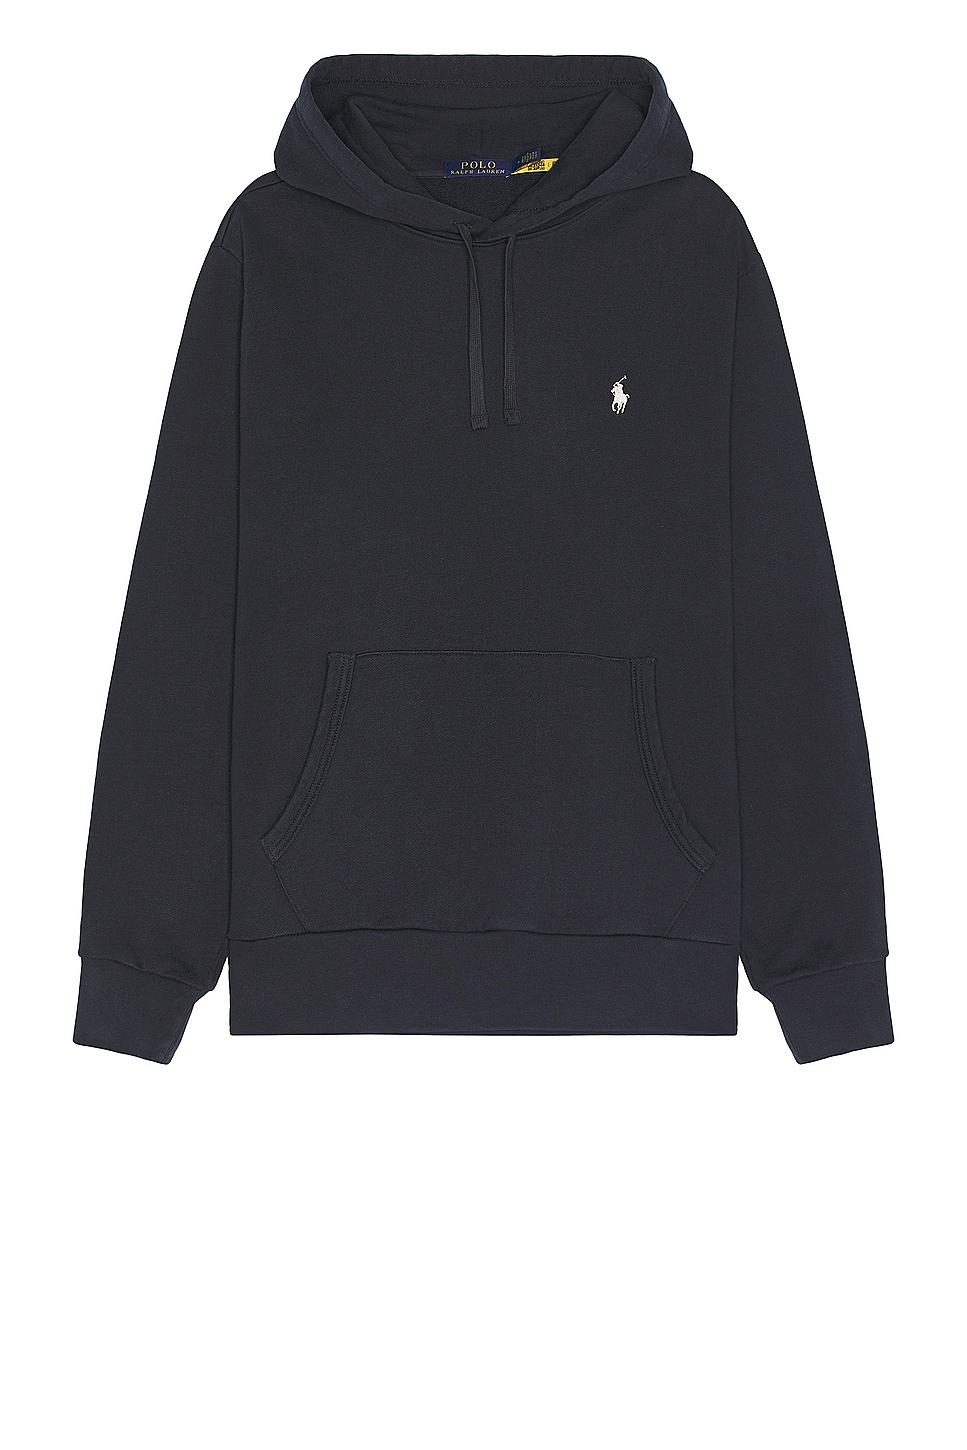 Image 1 of Polo Ralph Lauren Loopback Terry Hoodie in Faded Black Canvas